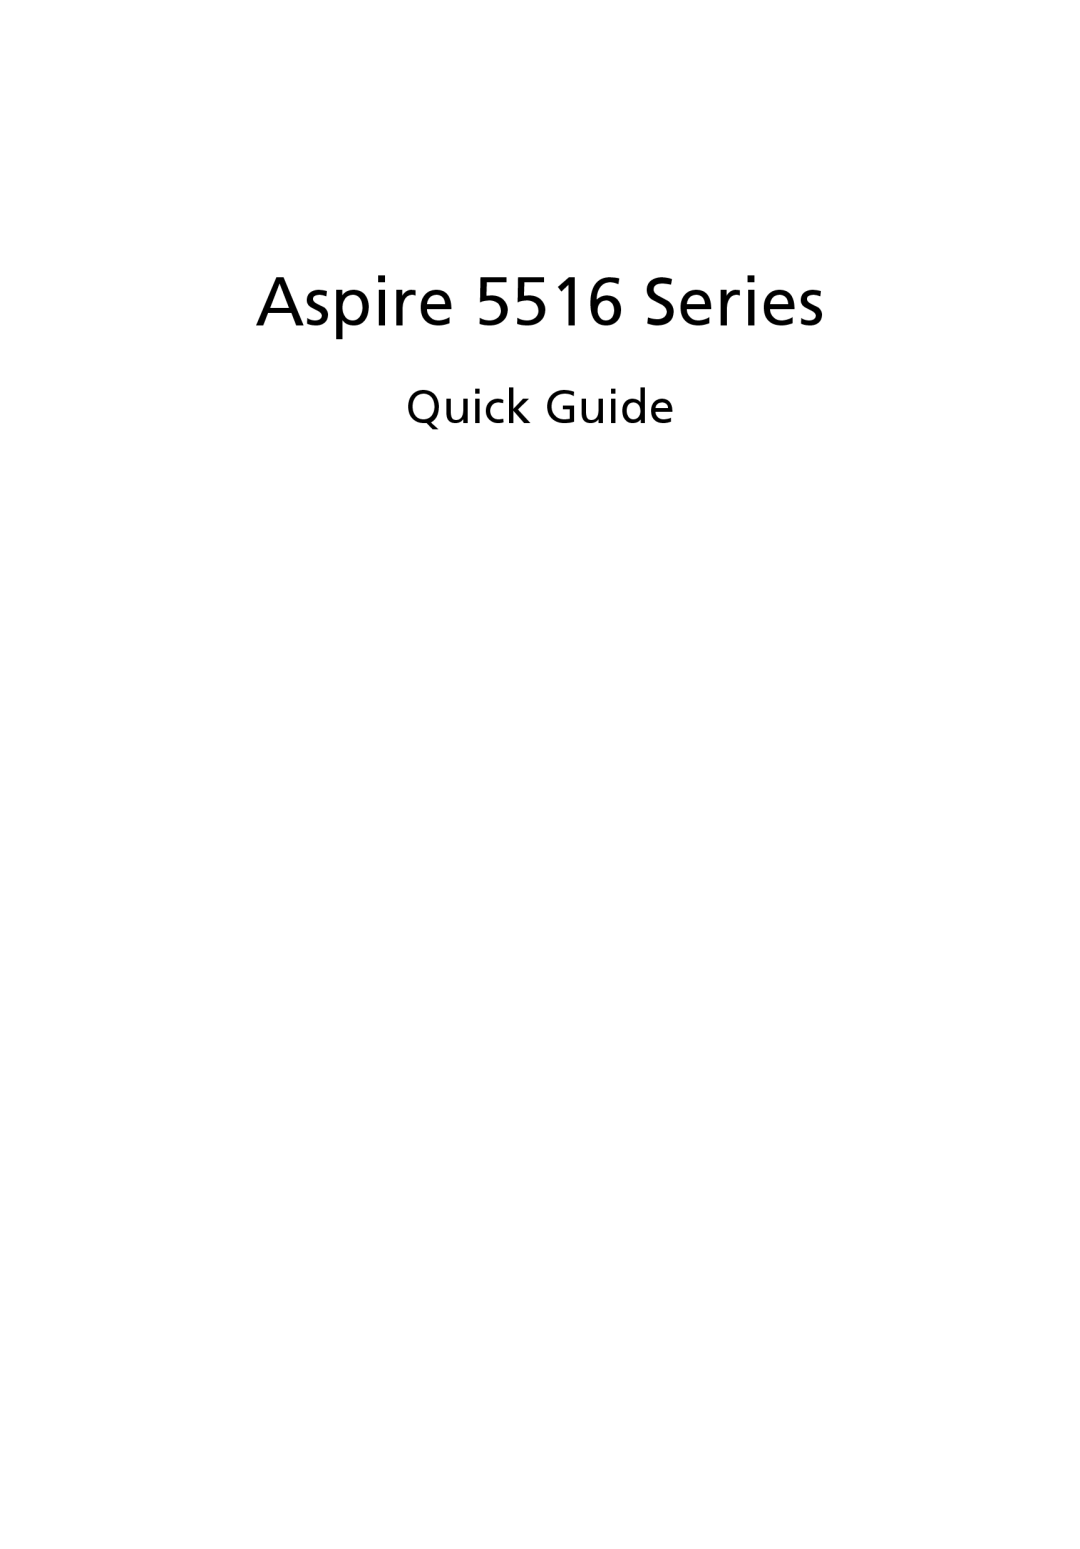 Acer manual Quick Guide, Aspire 5516 Series 